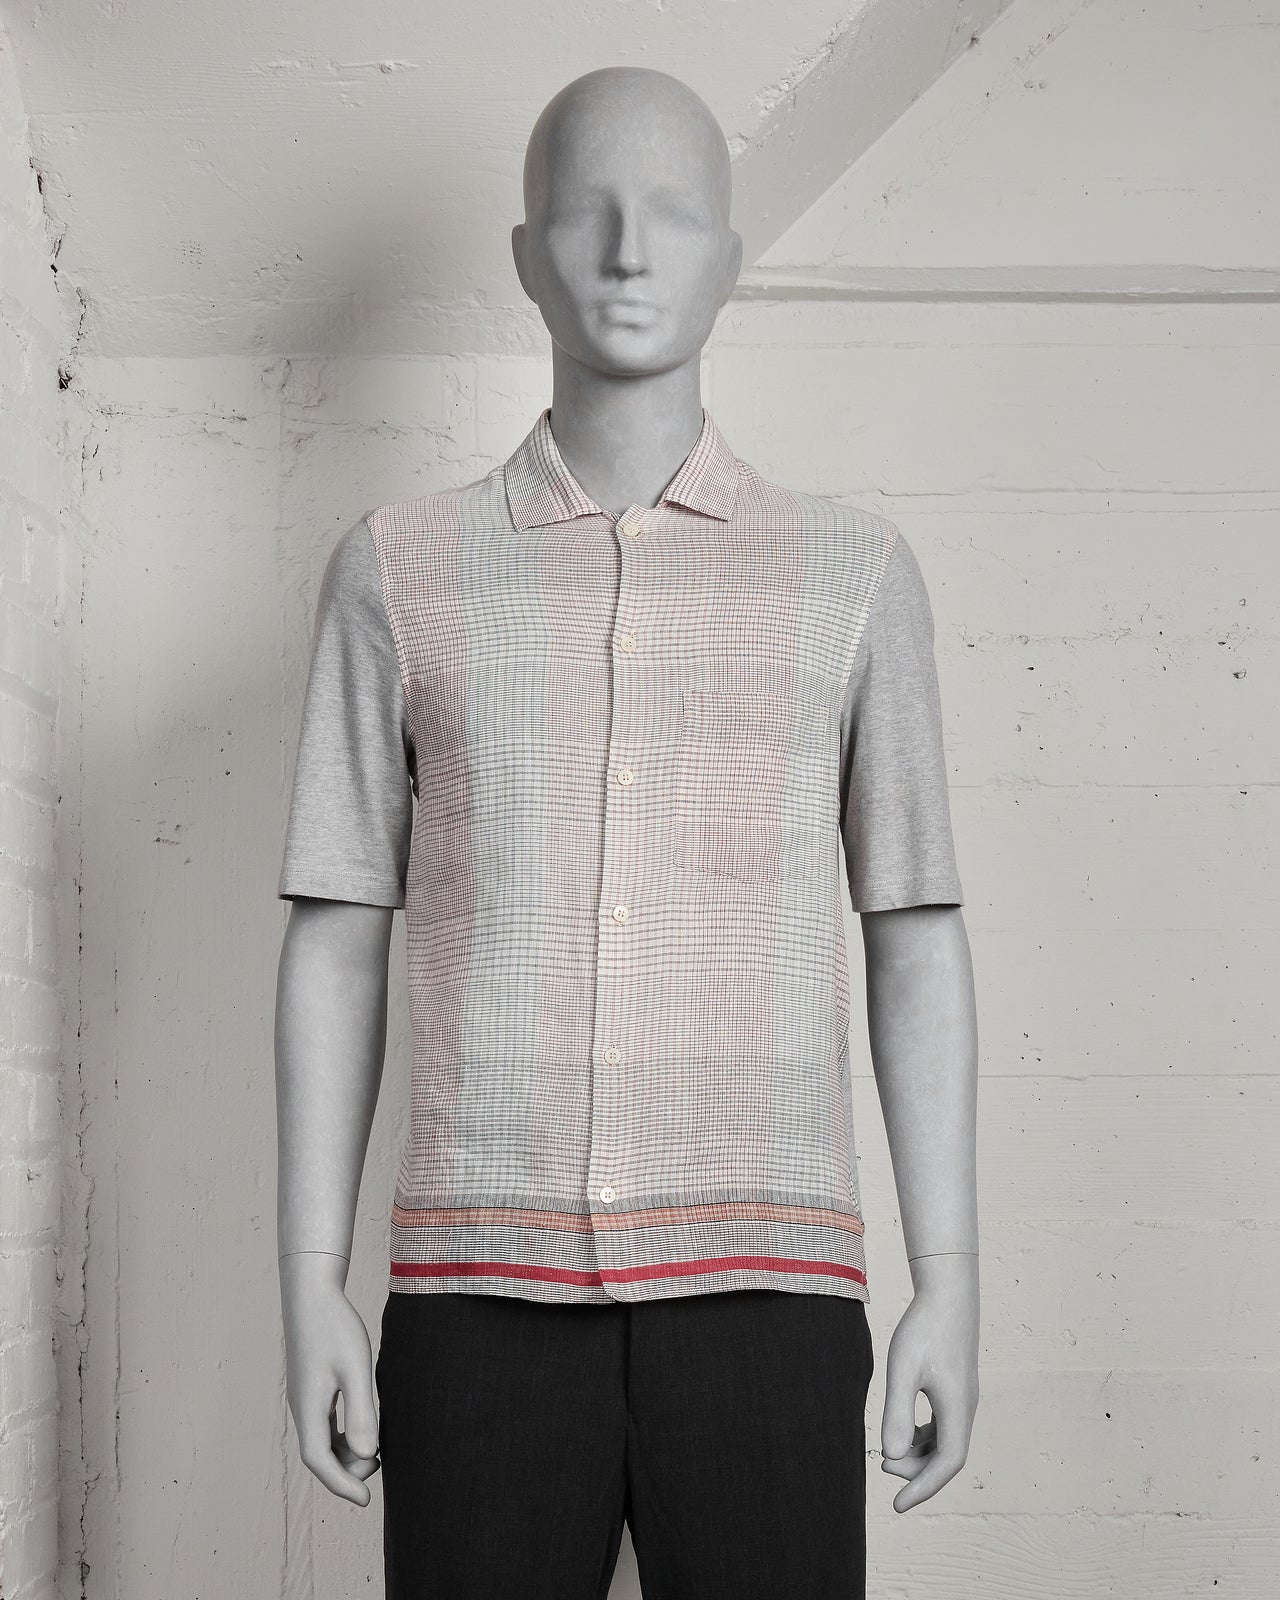 Hussein Chalayan Hybrid Plaid Jersey Shirt - SS05 "Act To Institution"